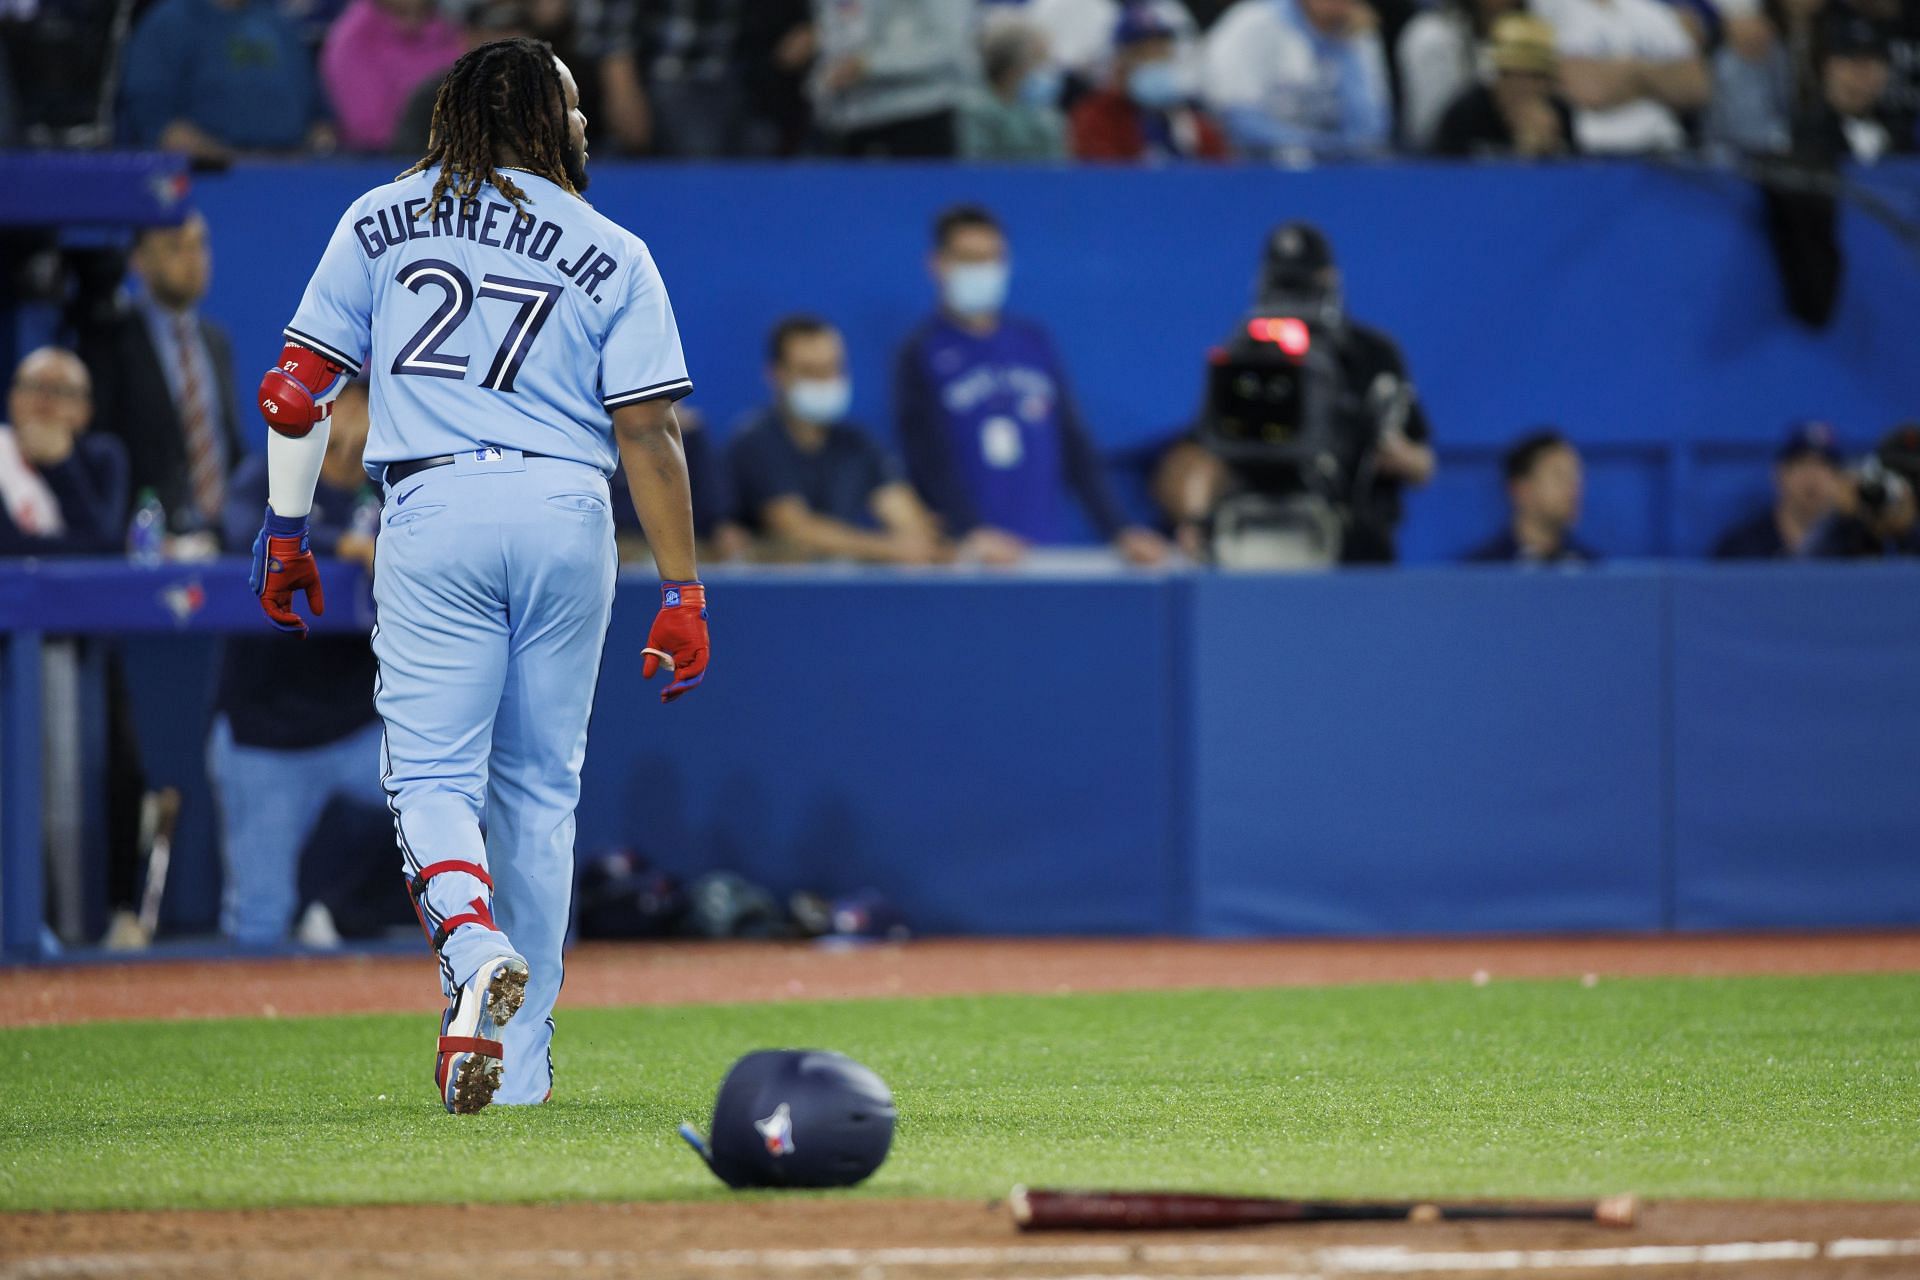 Toronto Blue Jays slugger Vladimir Guerrero Jr. did something unusual after grounding into an out against the Oakland Athletics today.